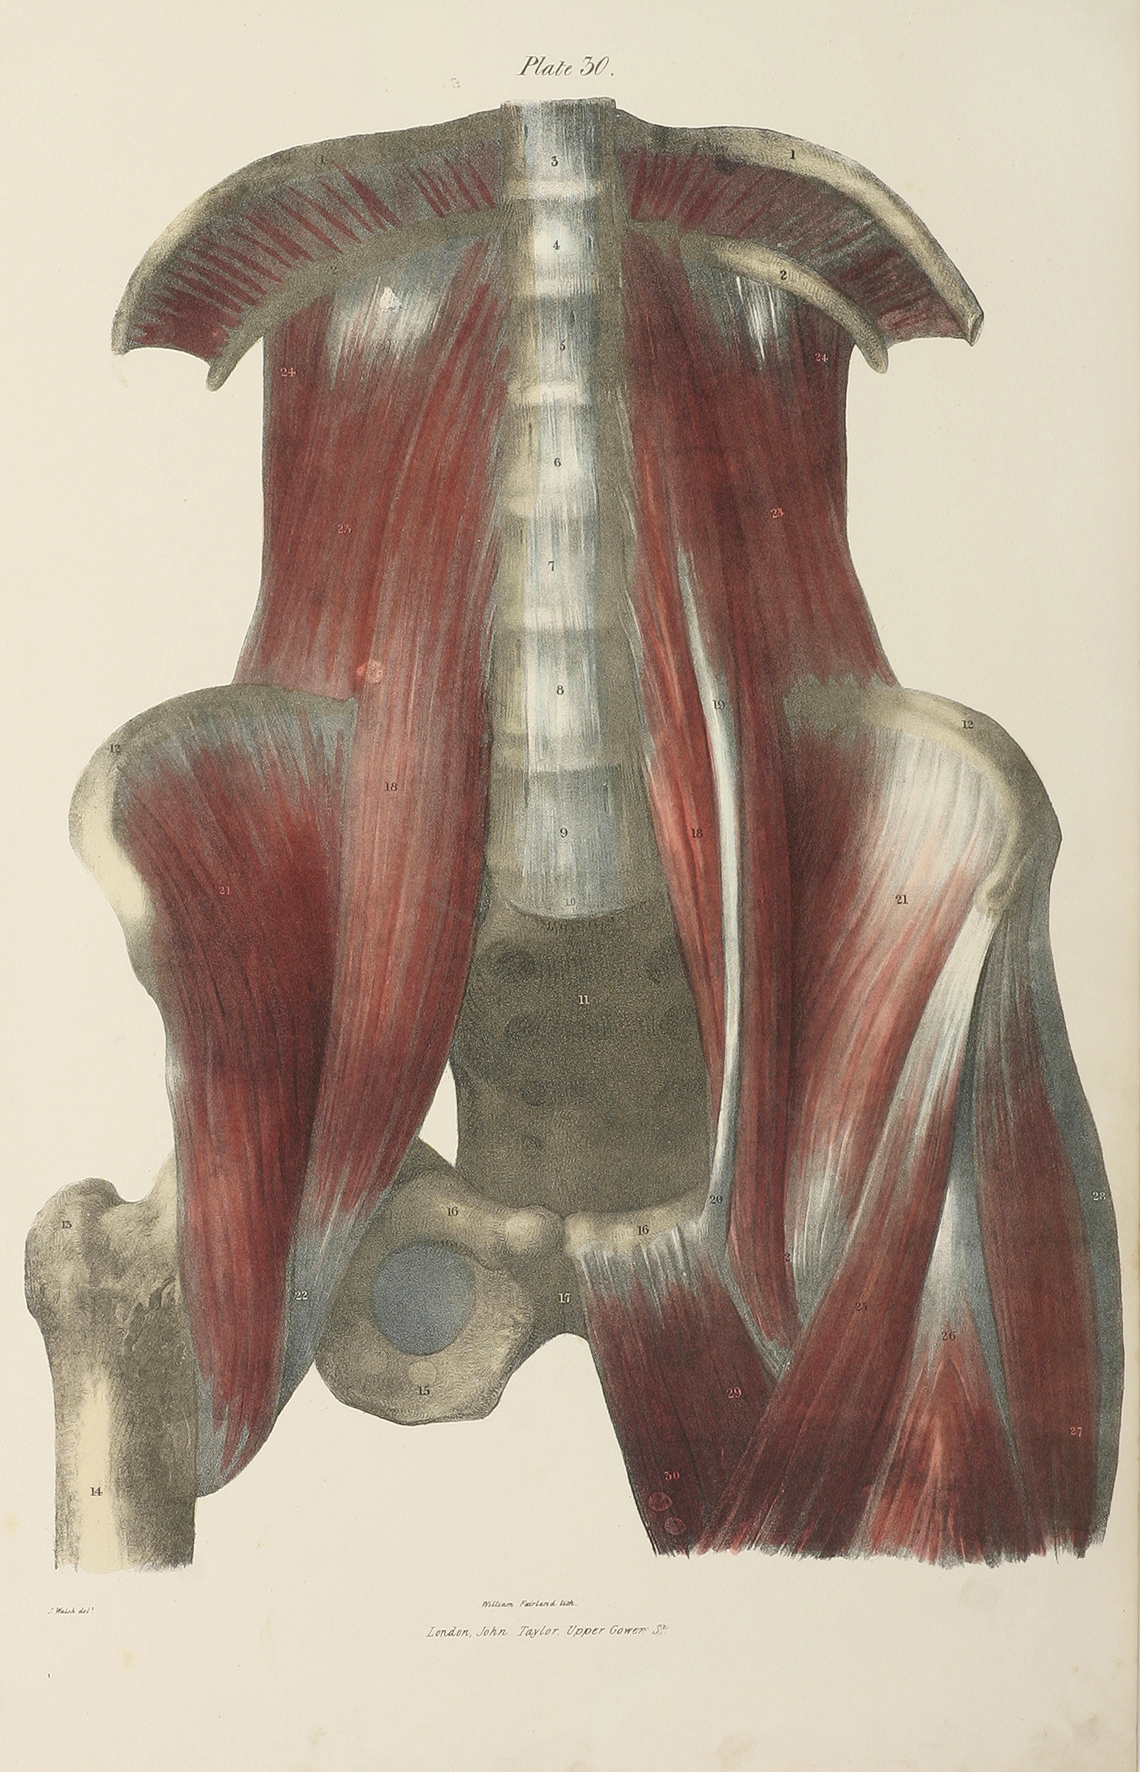 Muscles of the Lumbar spine and Brim of the Pelvis - Antique Print from 1838